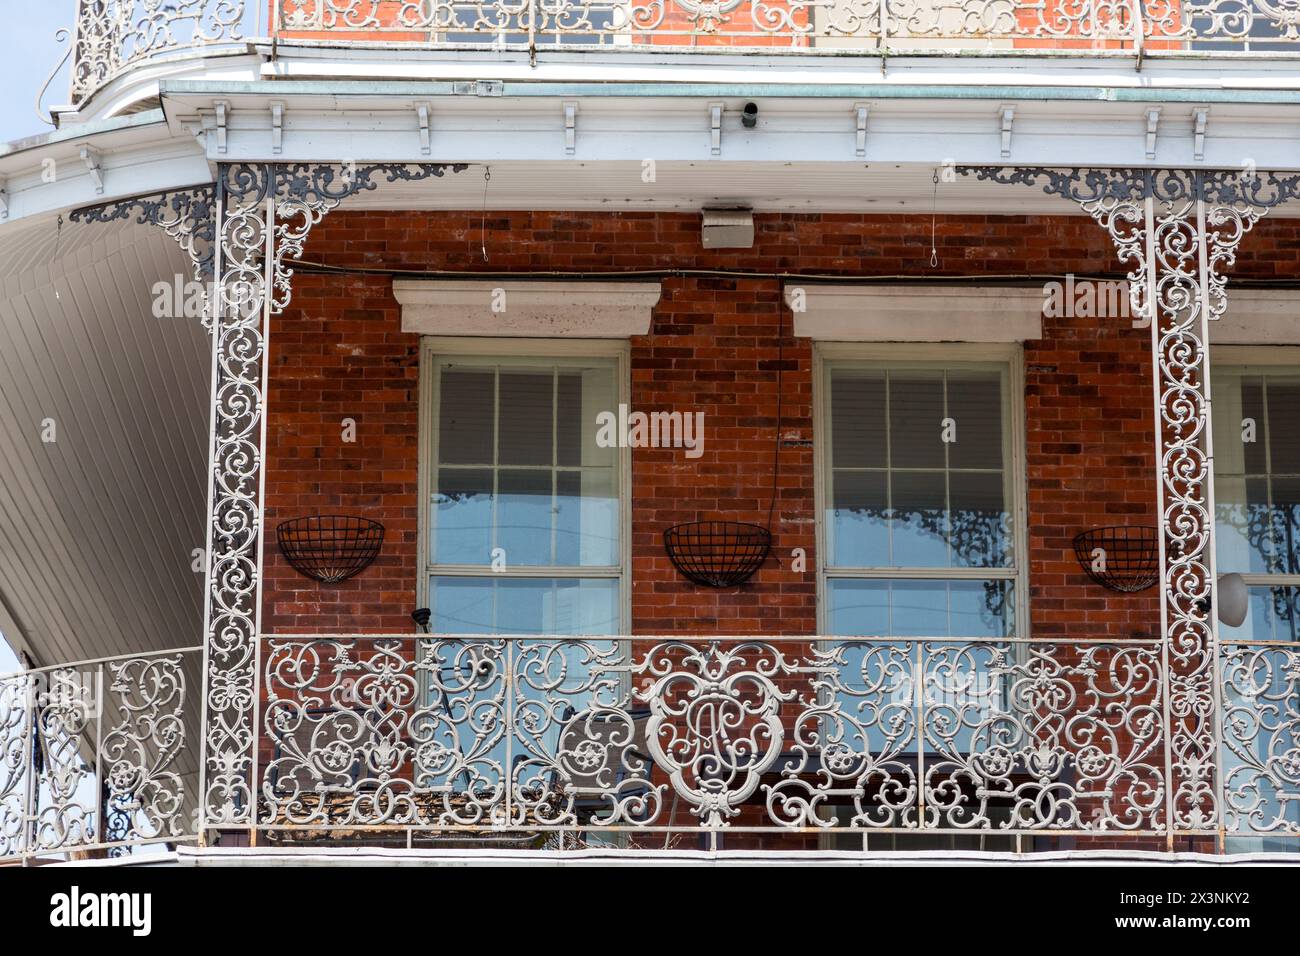 New Orleans, Louisiana. French Quarter, Decorative Grillwork on the Pontalba Building, Built 1851. Stock Photo